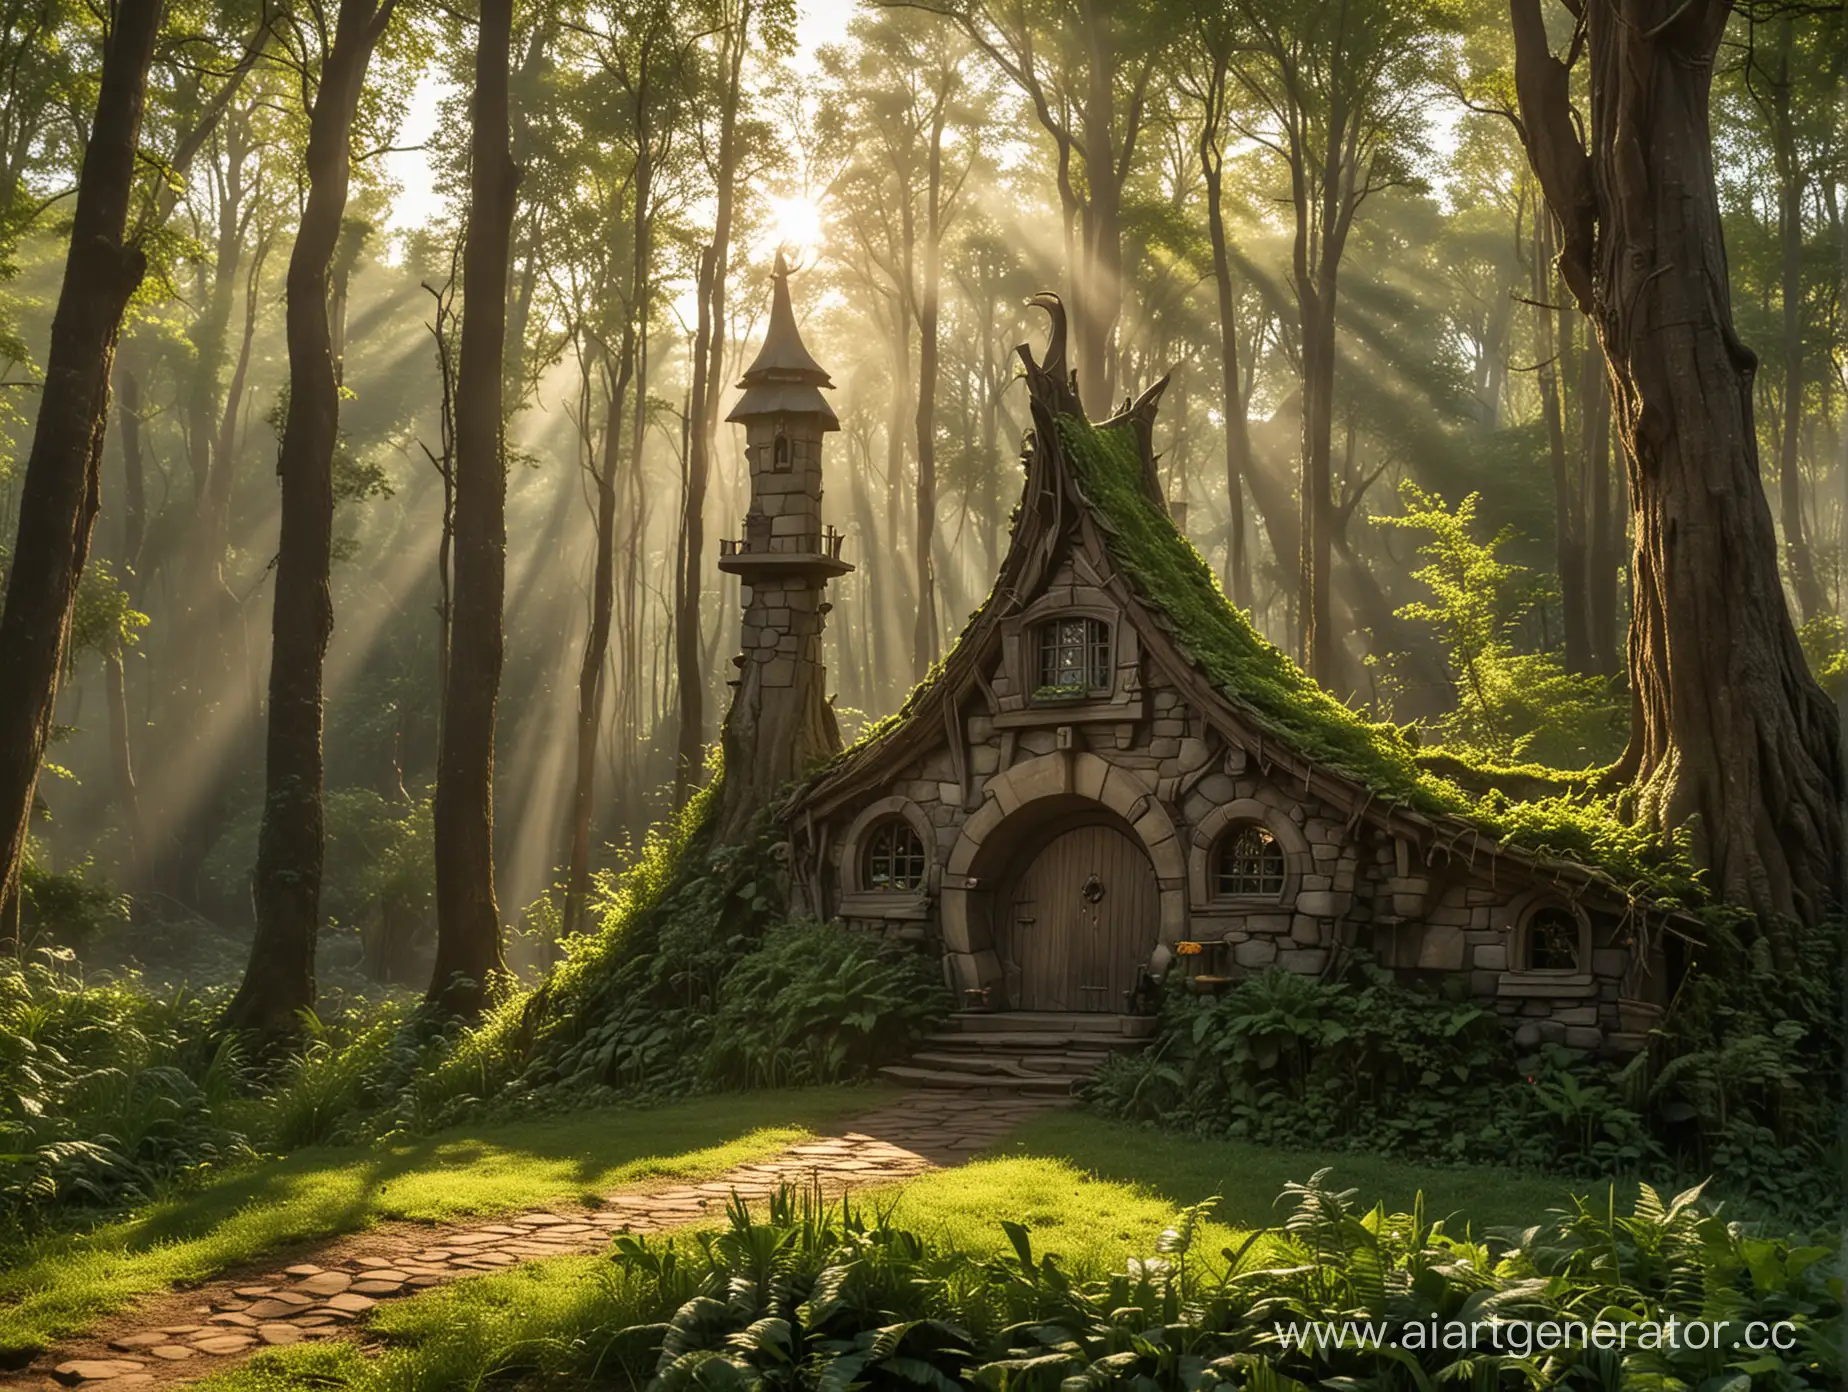 Enchanted-Fairy-House-in-Sunlit-Forest